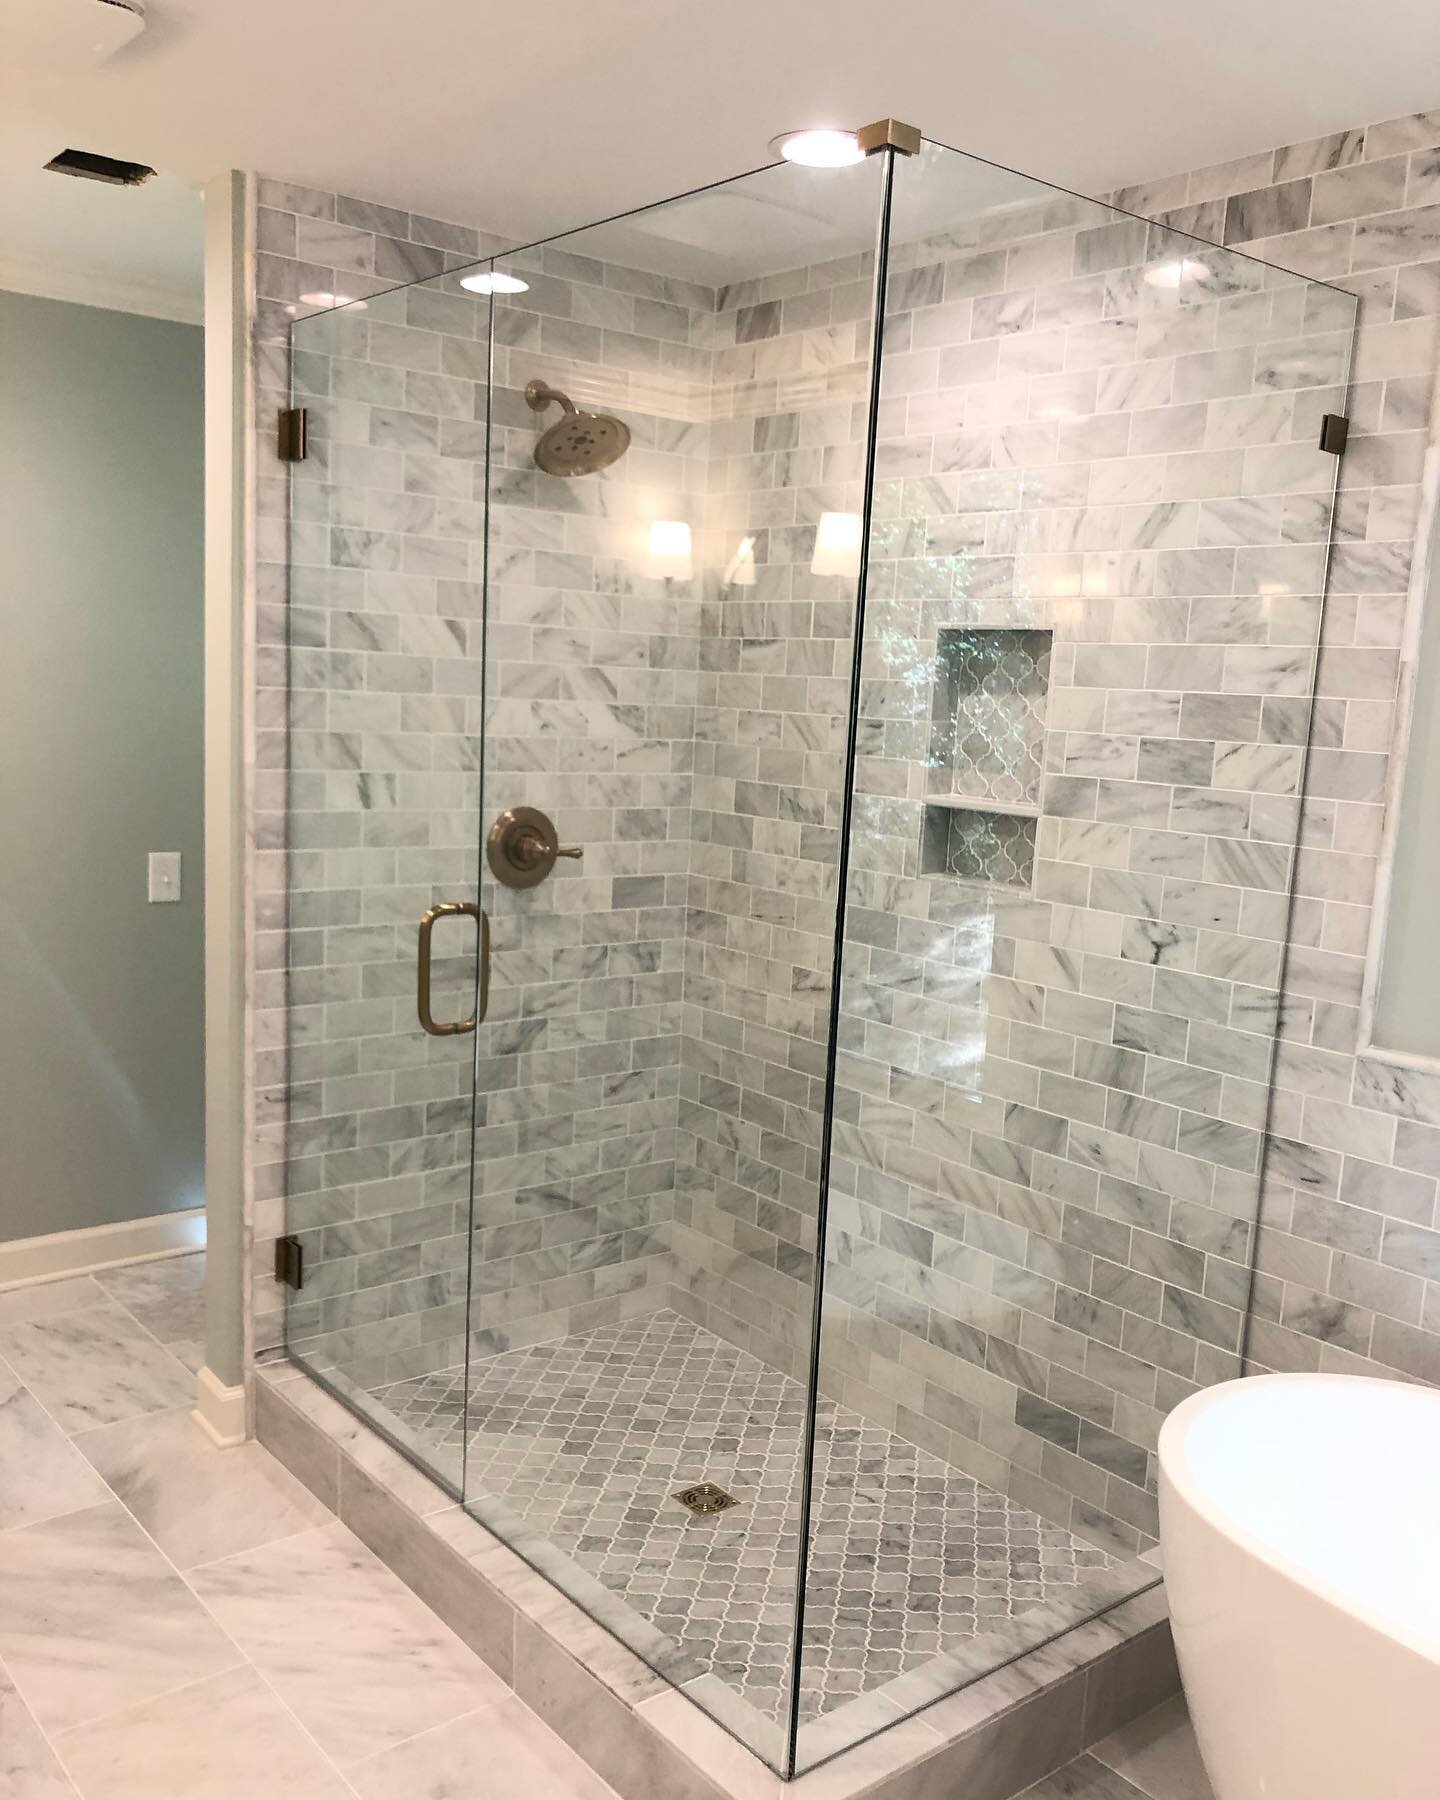 Before and After - - more to come on this beautiful marble clad bathroom transformation!